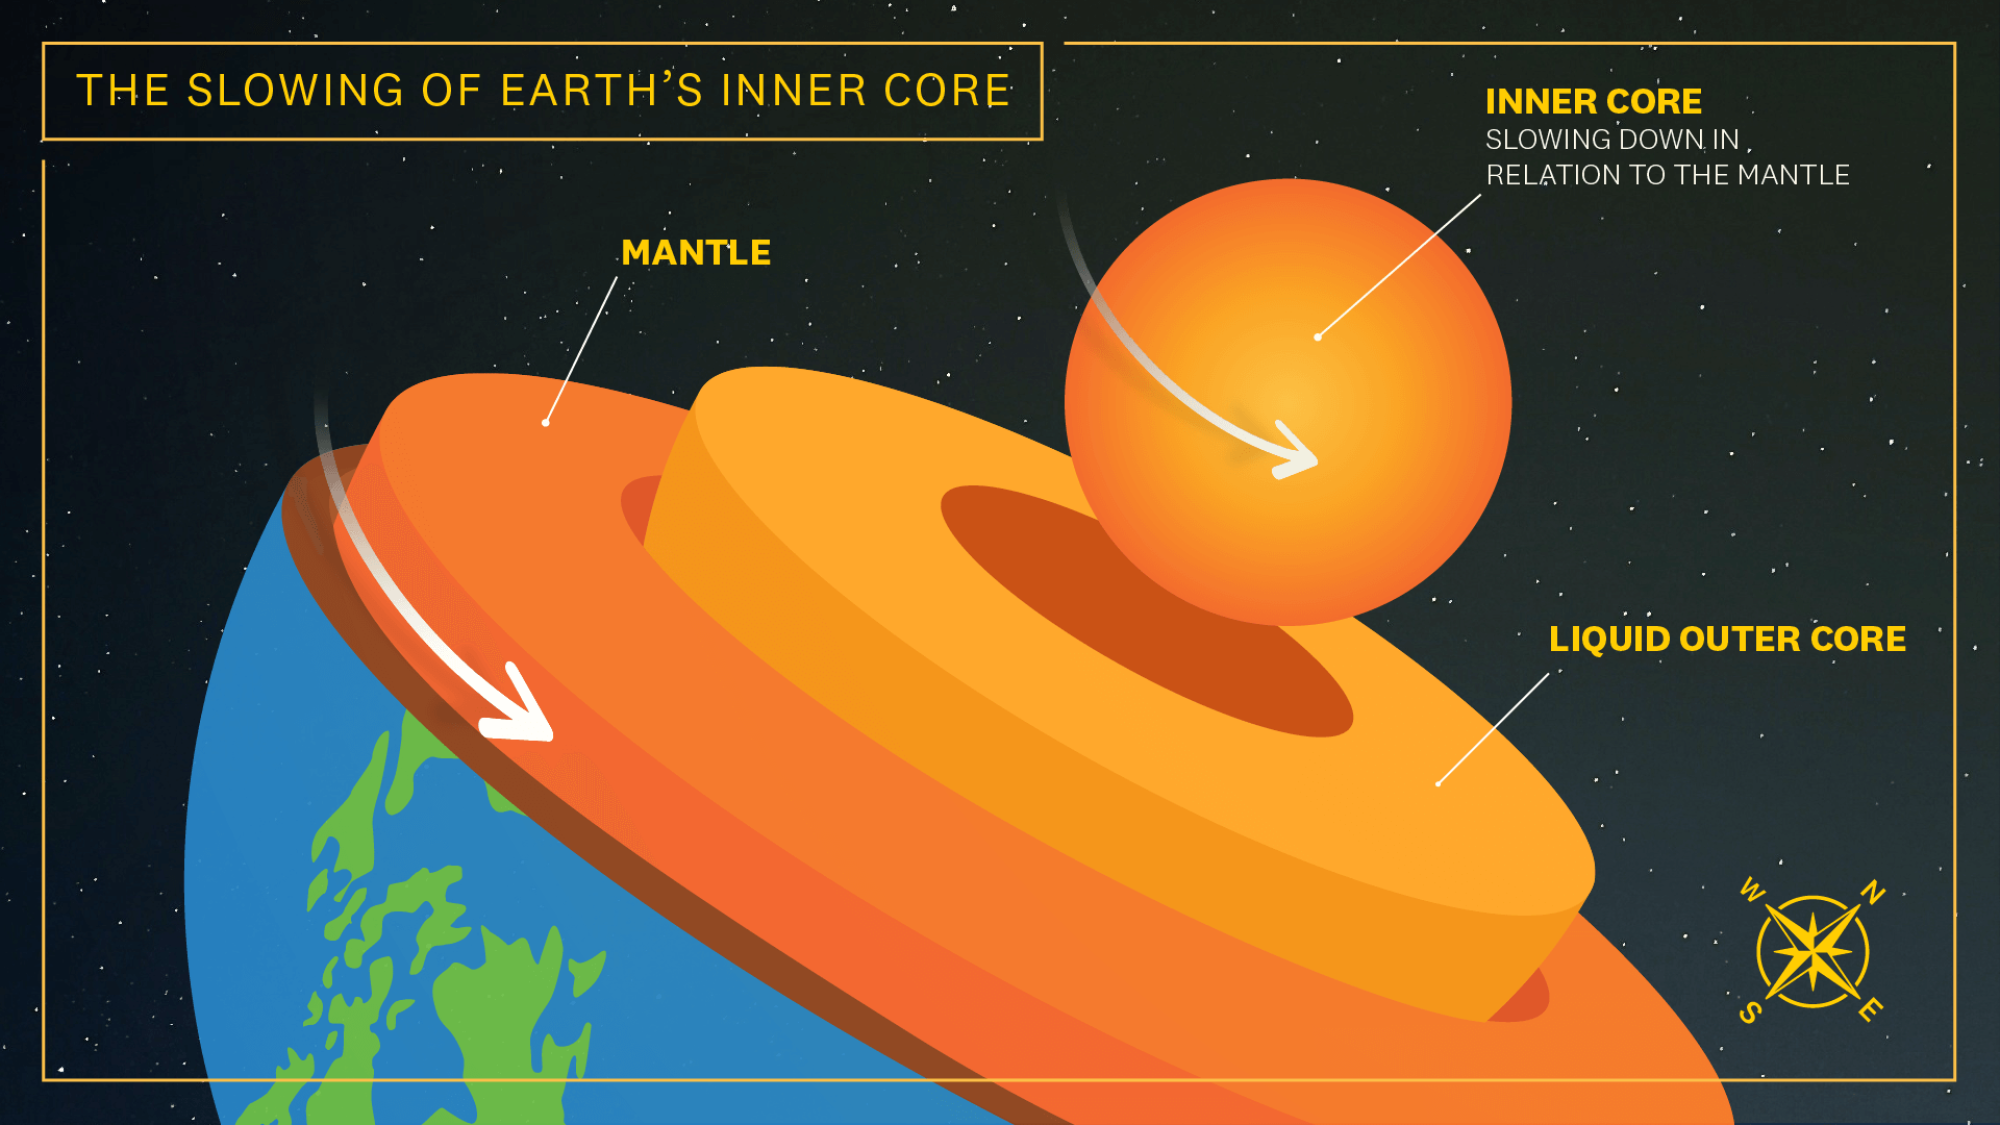 Graphic shows Earth's inner core and mantle, separated by a liquid outer core